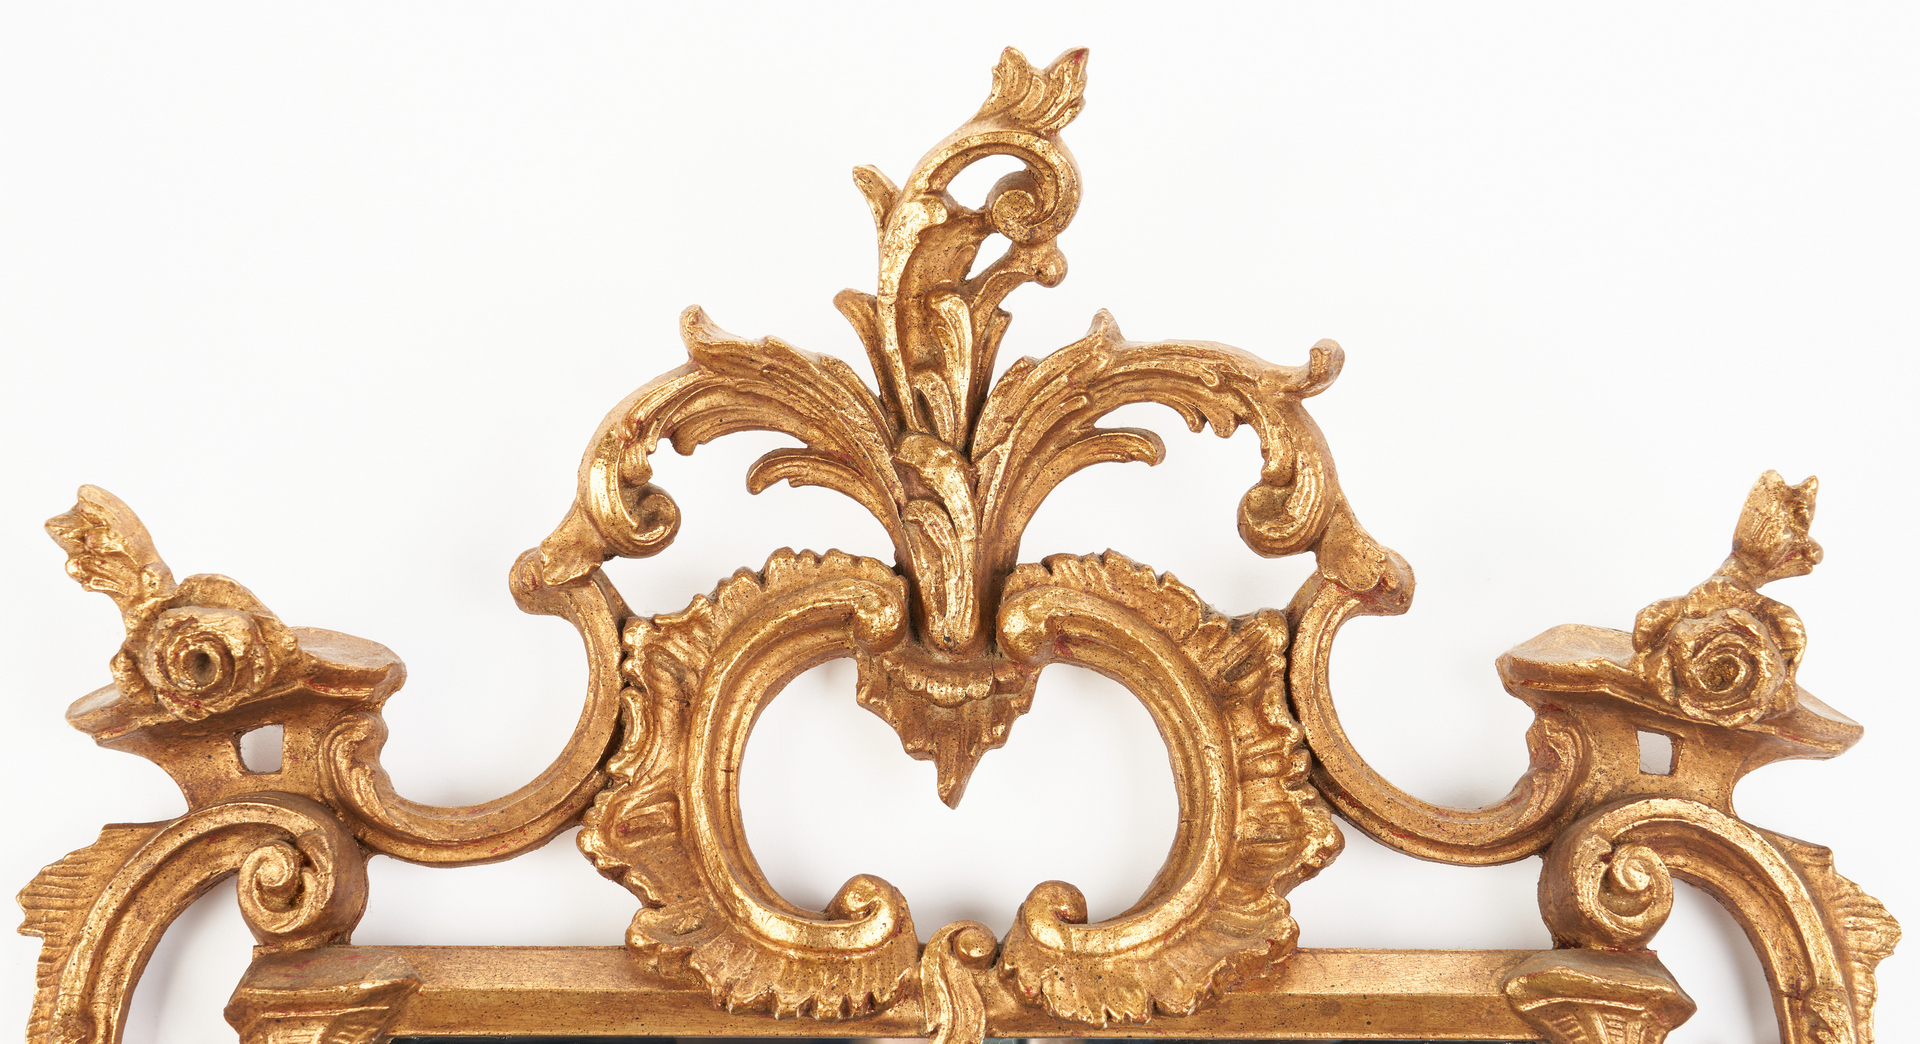 Lot 1108: Rococo Style Giltwood Mirror by Uthmanor of Nashville